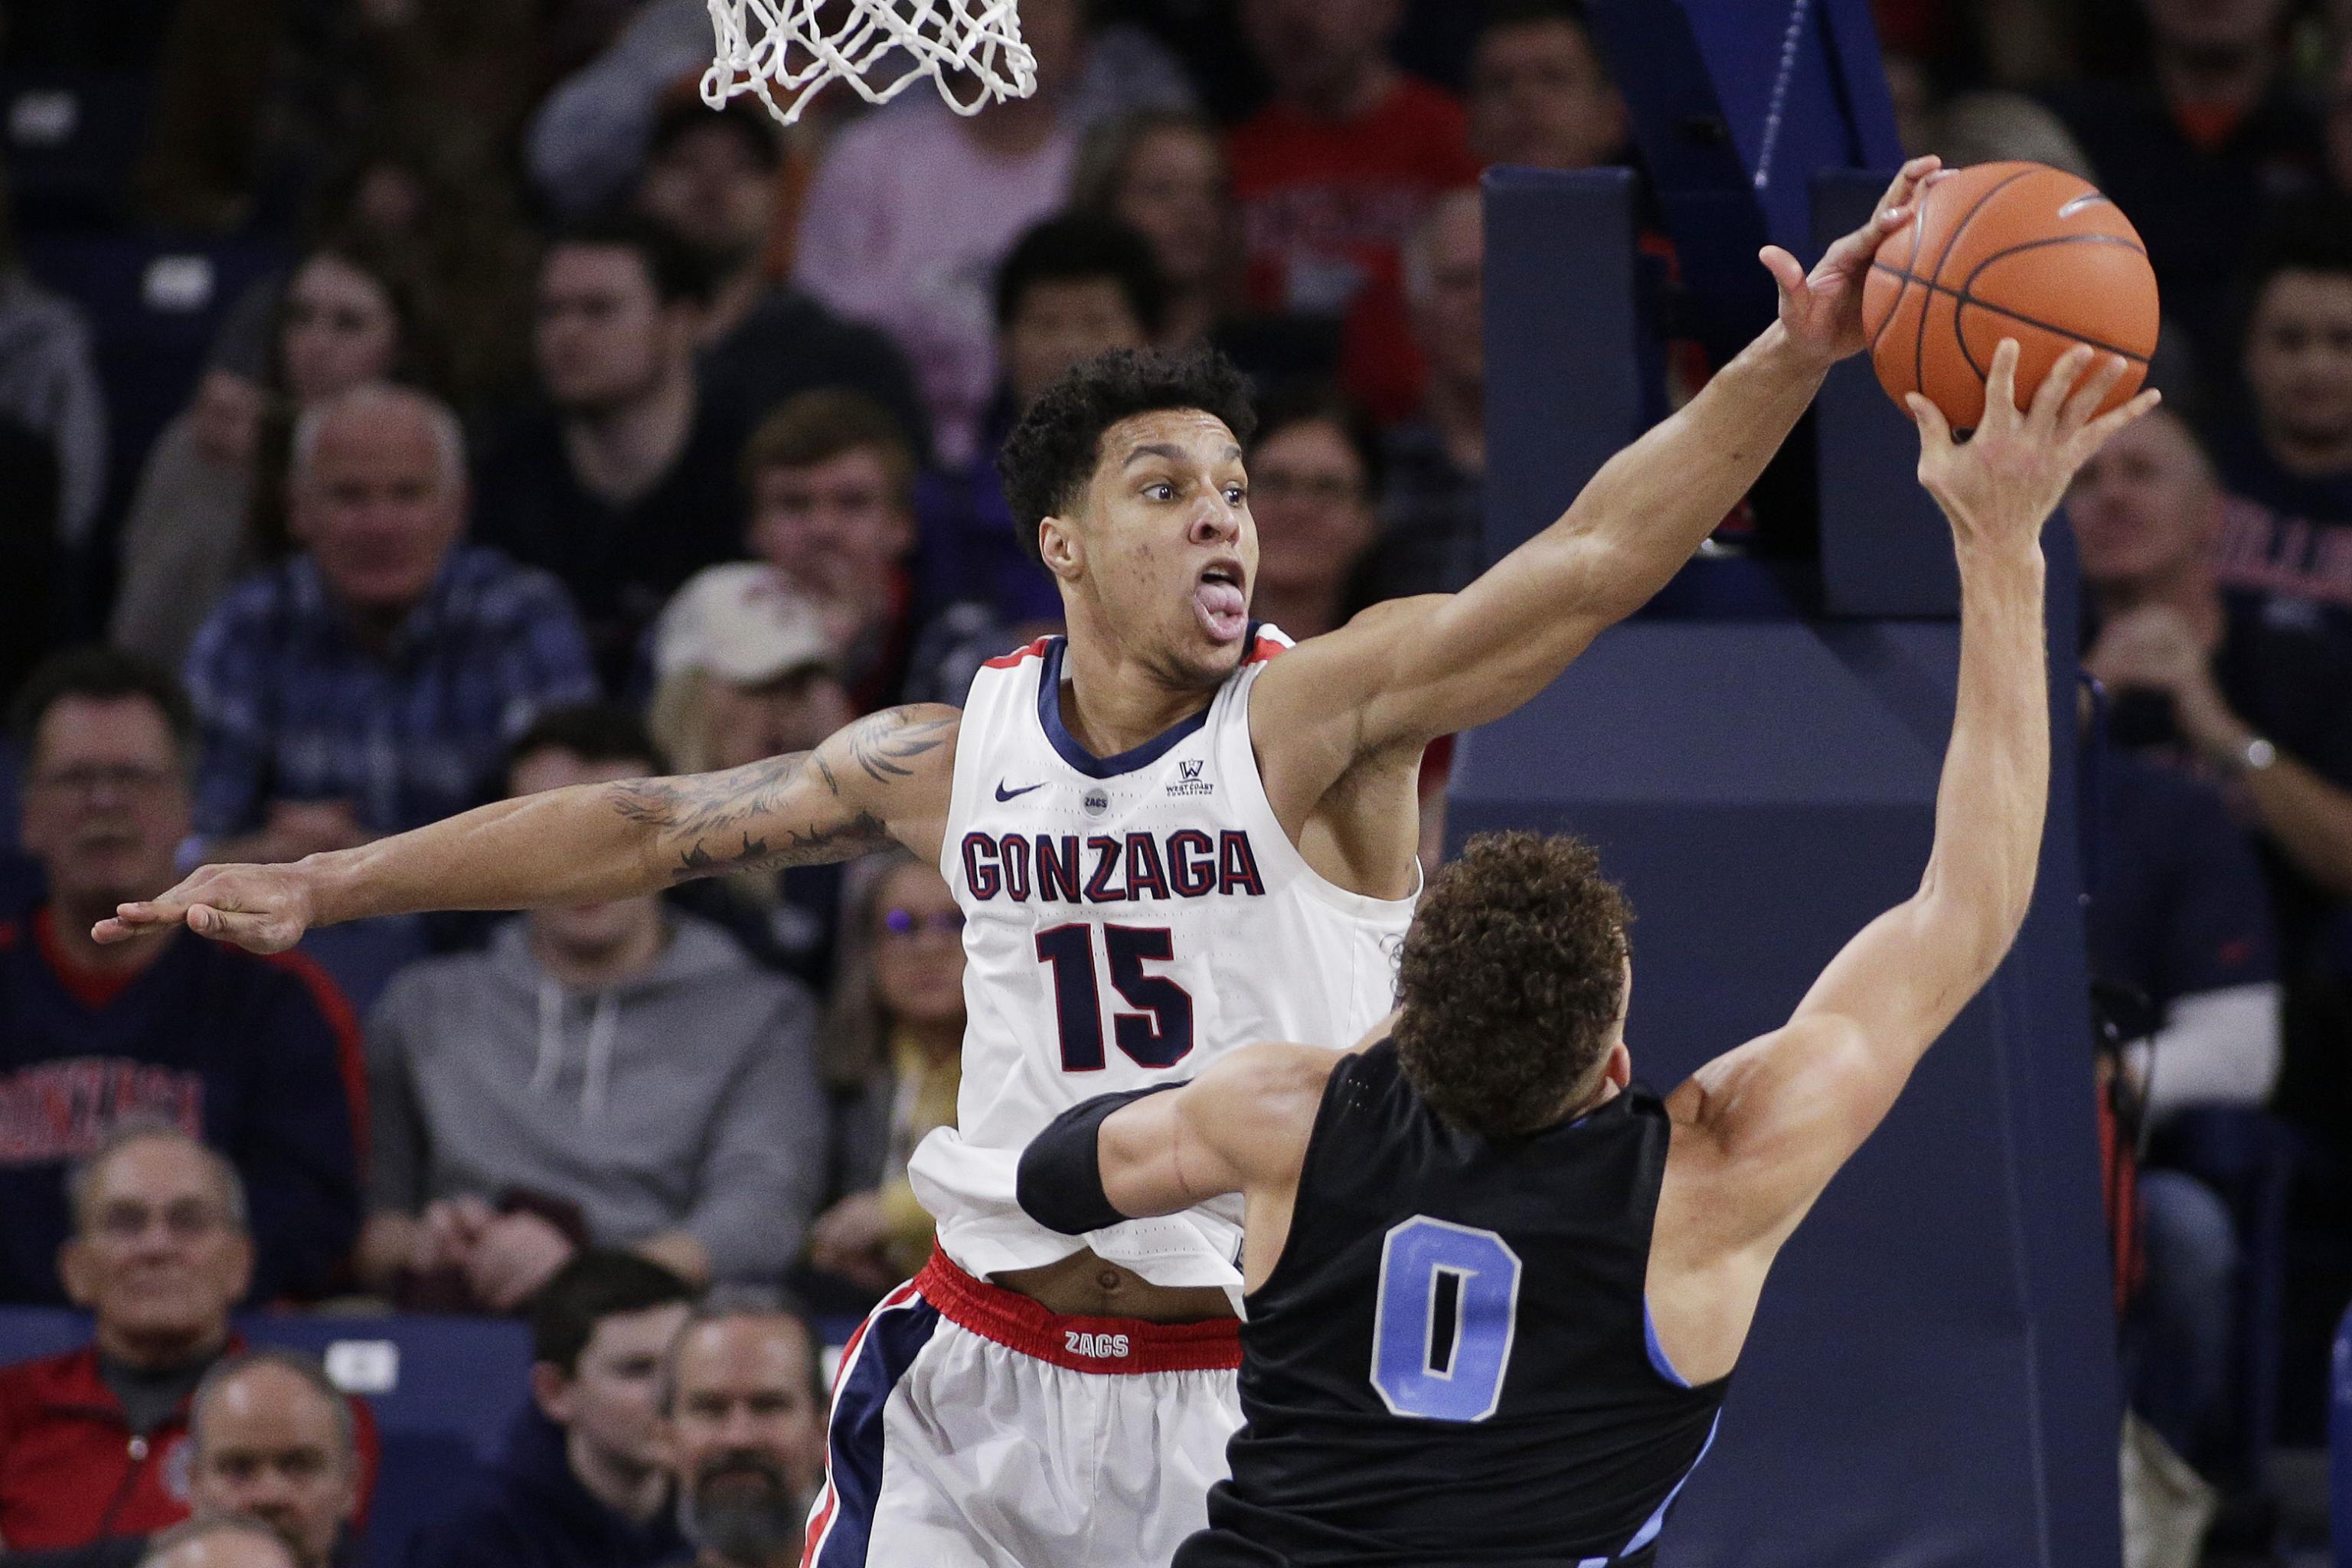 Gonzaga S Best Team Ever Can Finally Break Small School March Madness Drought Bleacher Report Latest News Videos And Highlights